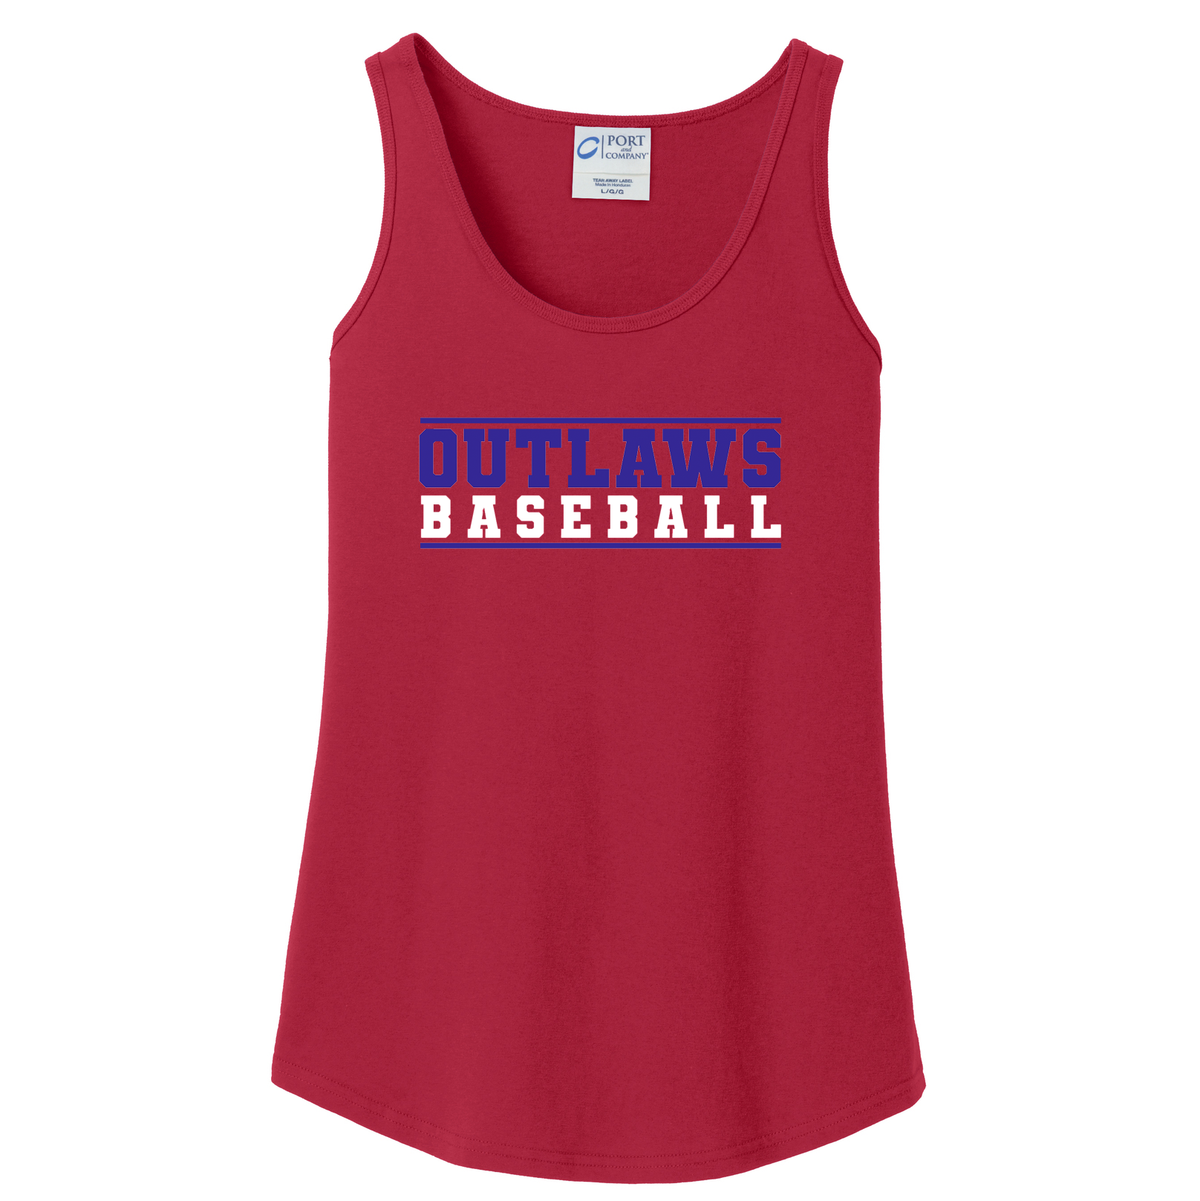 Southern Indiana Outlaws Baseball Women's Tank Top